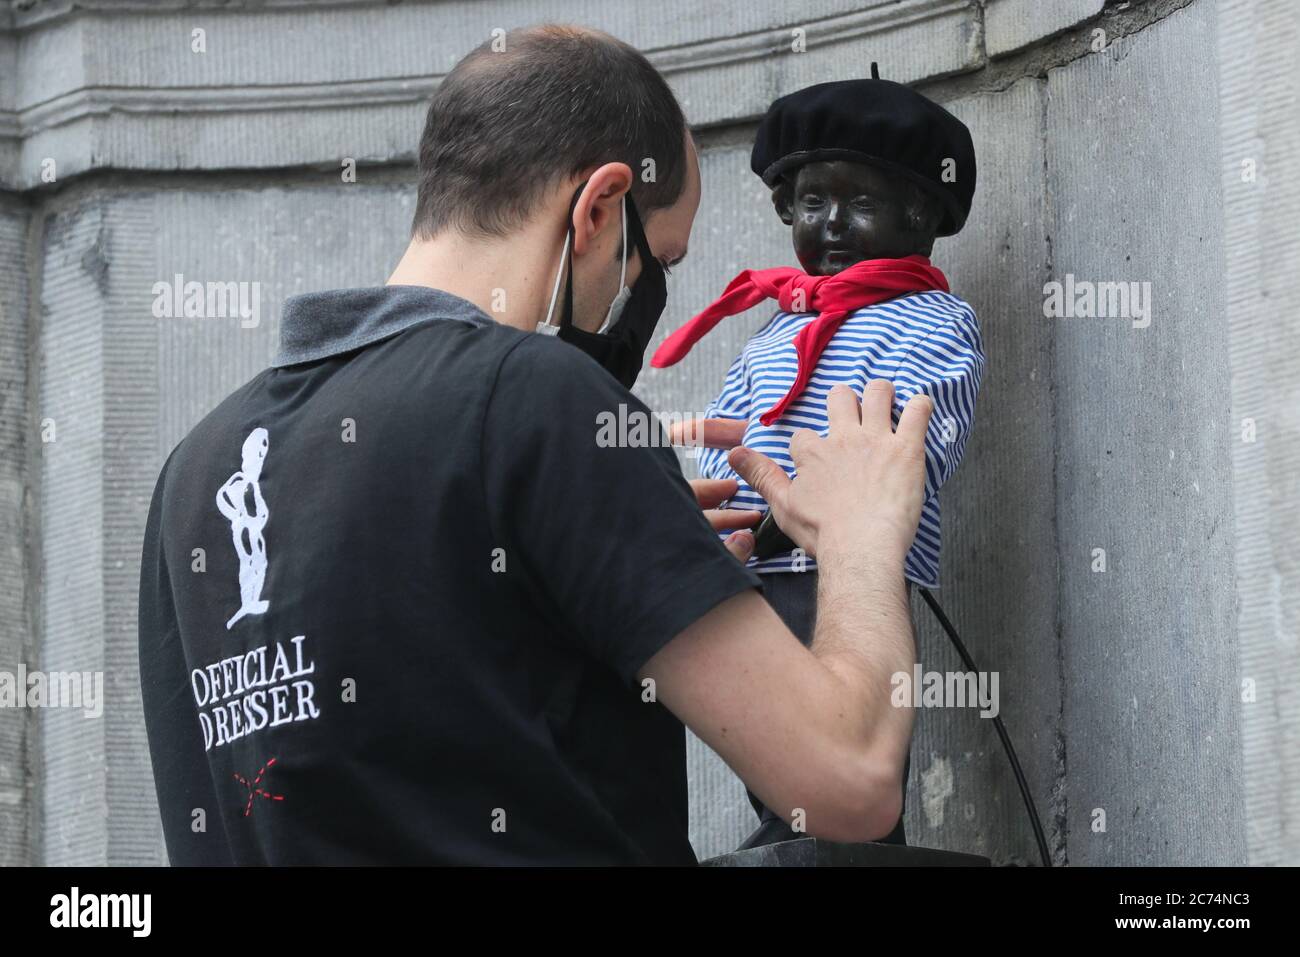 Brussels, Belgium. 14th July, 2020. An official dresser dresses the Manneken-Pis up in Brussels, Belgium, July 14, 2020. Manneken-Pis, the symbol of Brussels folklore, gets costumes at major events. He wore a suit with beret and baguette on Tuesday to commemorate the French national day which falls on July 14 every year. Credit: Zheng Huansong/Xinhua/Alamy Live News Stock Photo